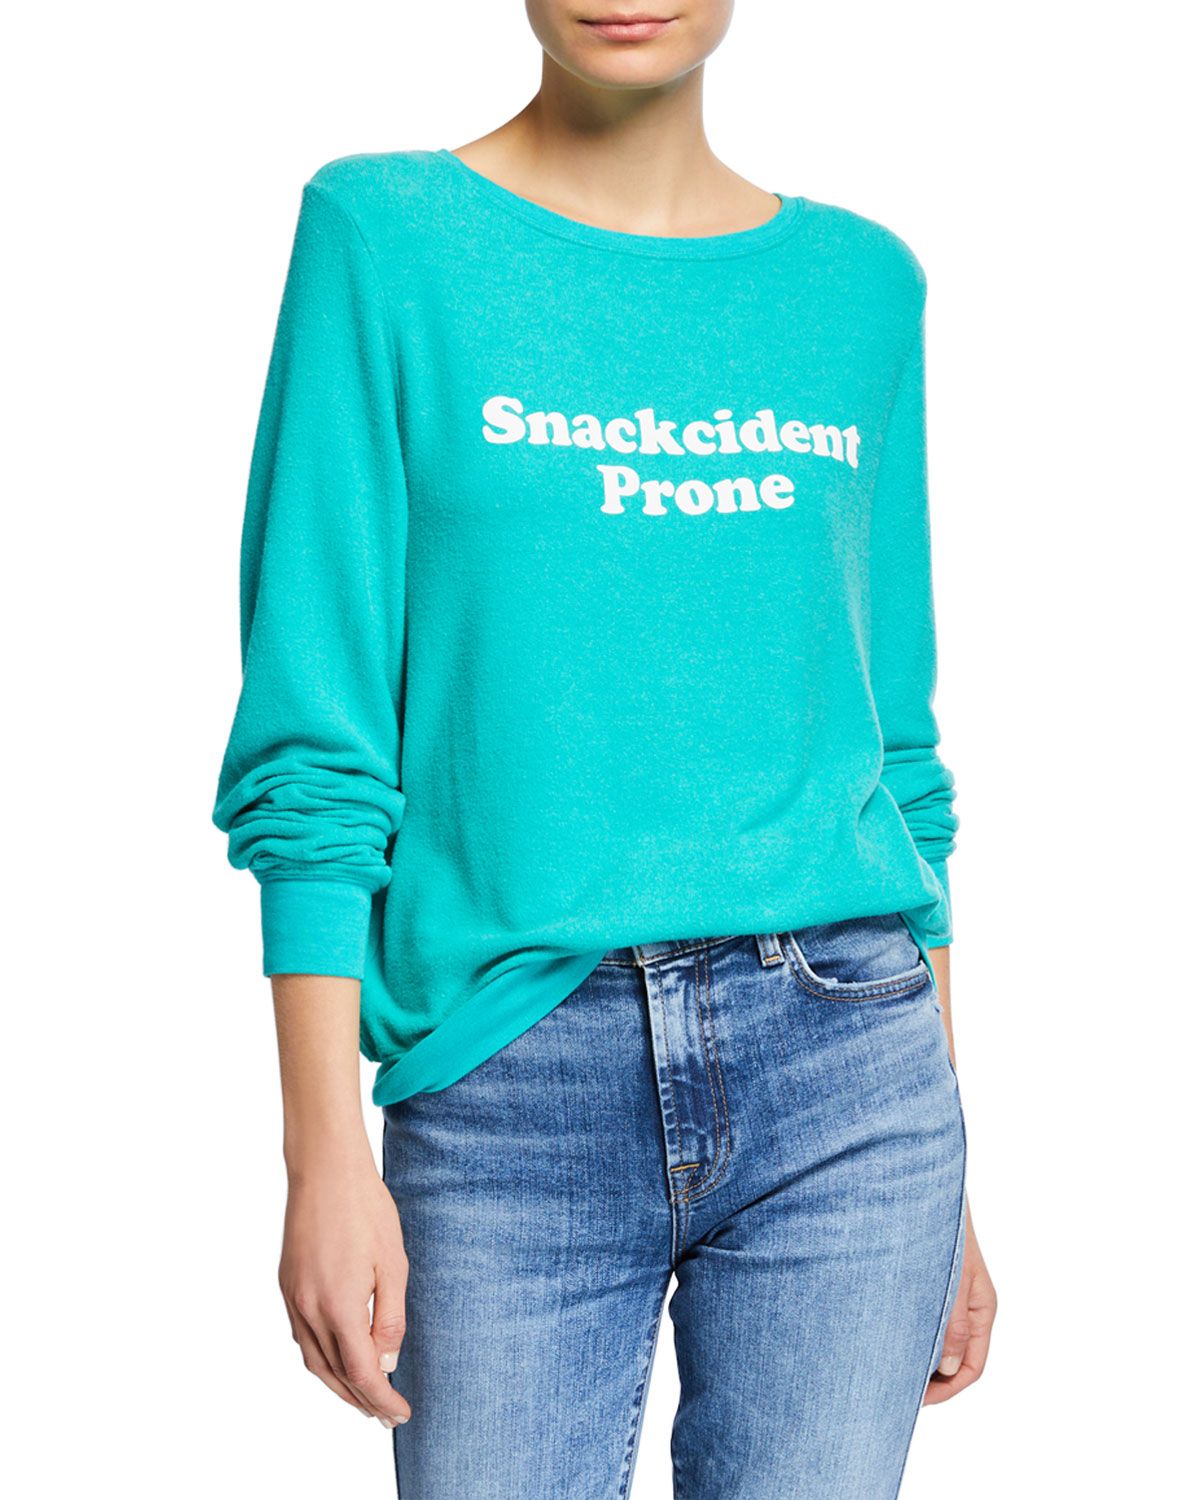 Snackcident Prone Relaxed Crewneck Sweater | Neiman Marcus